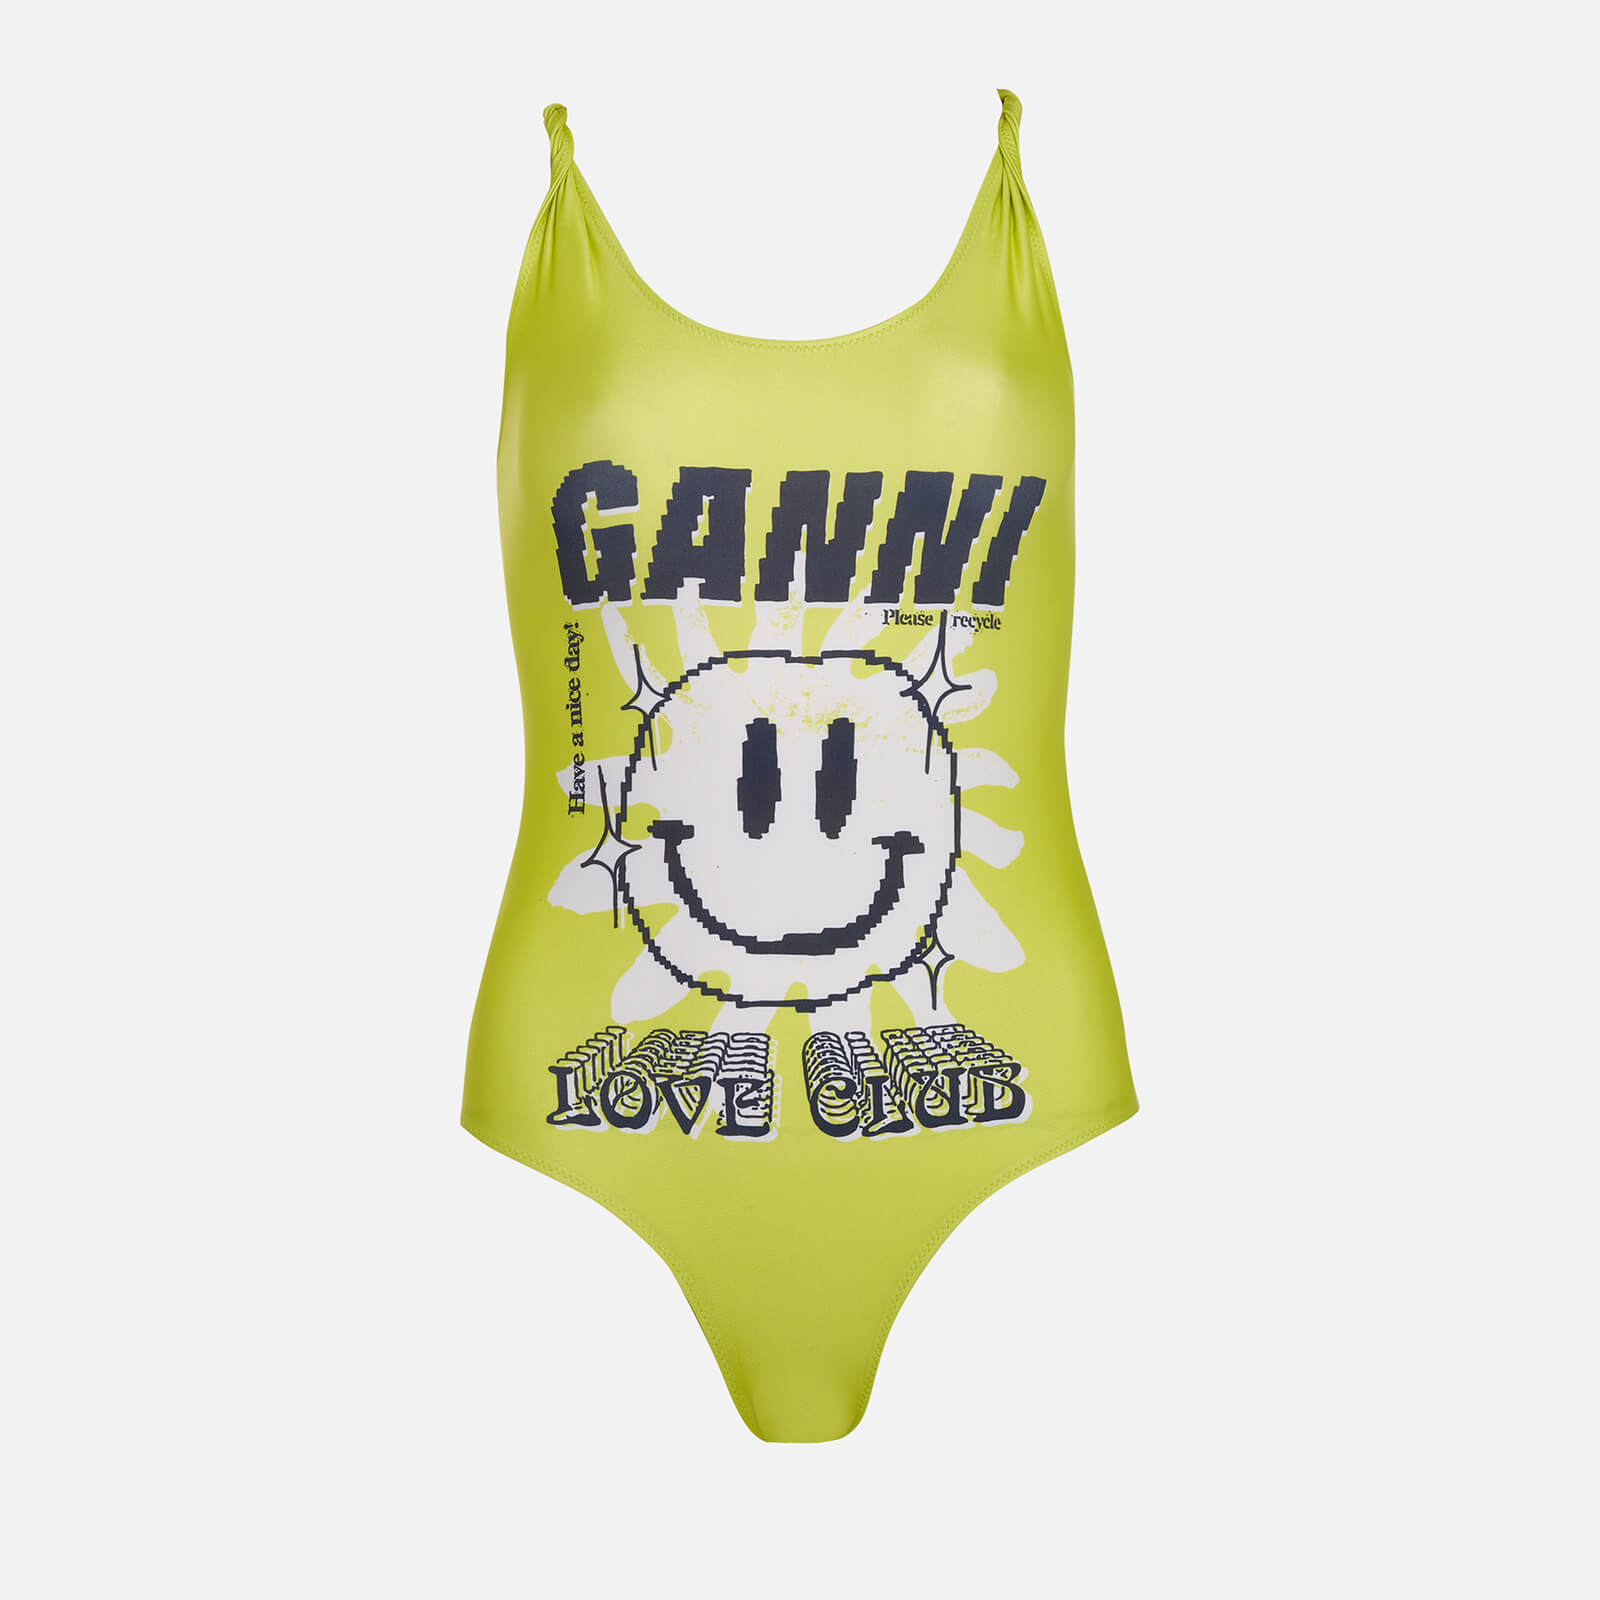 Ganni Women's Recycled Graphic Smiley Face Swimsuit - Blazing Yellow